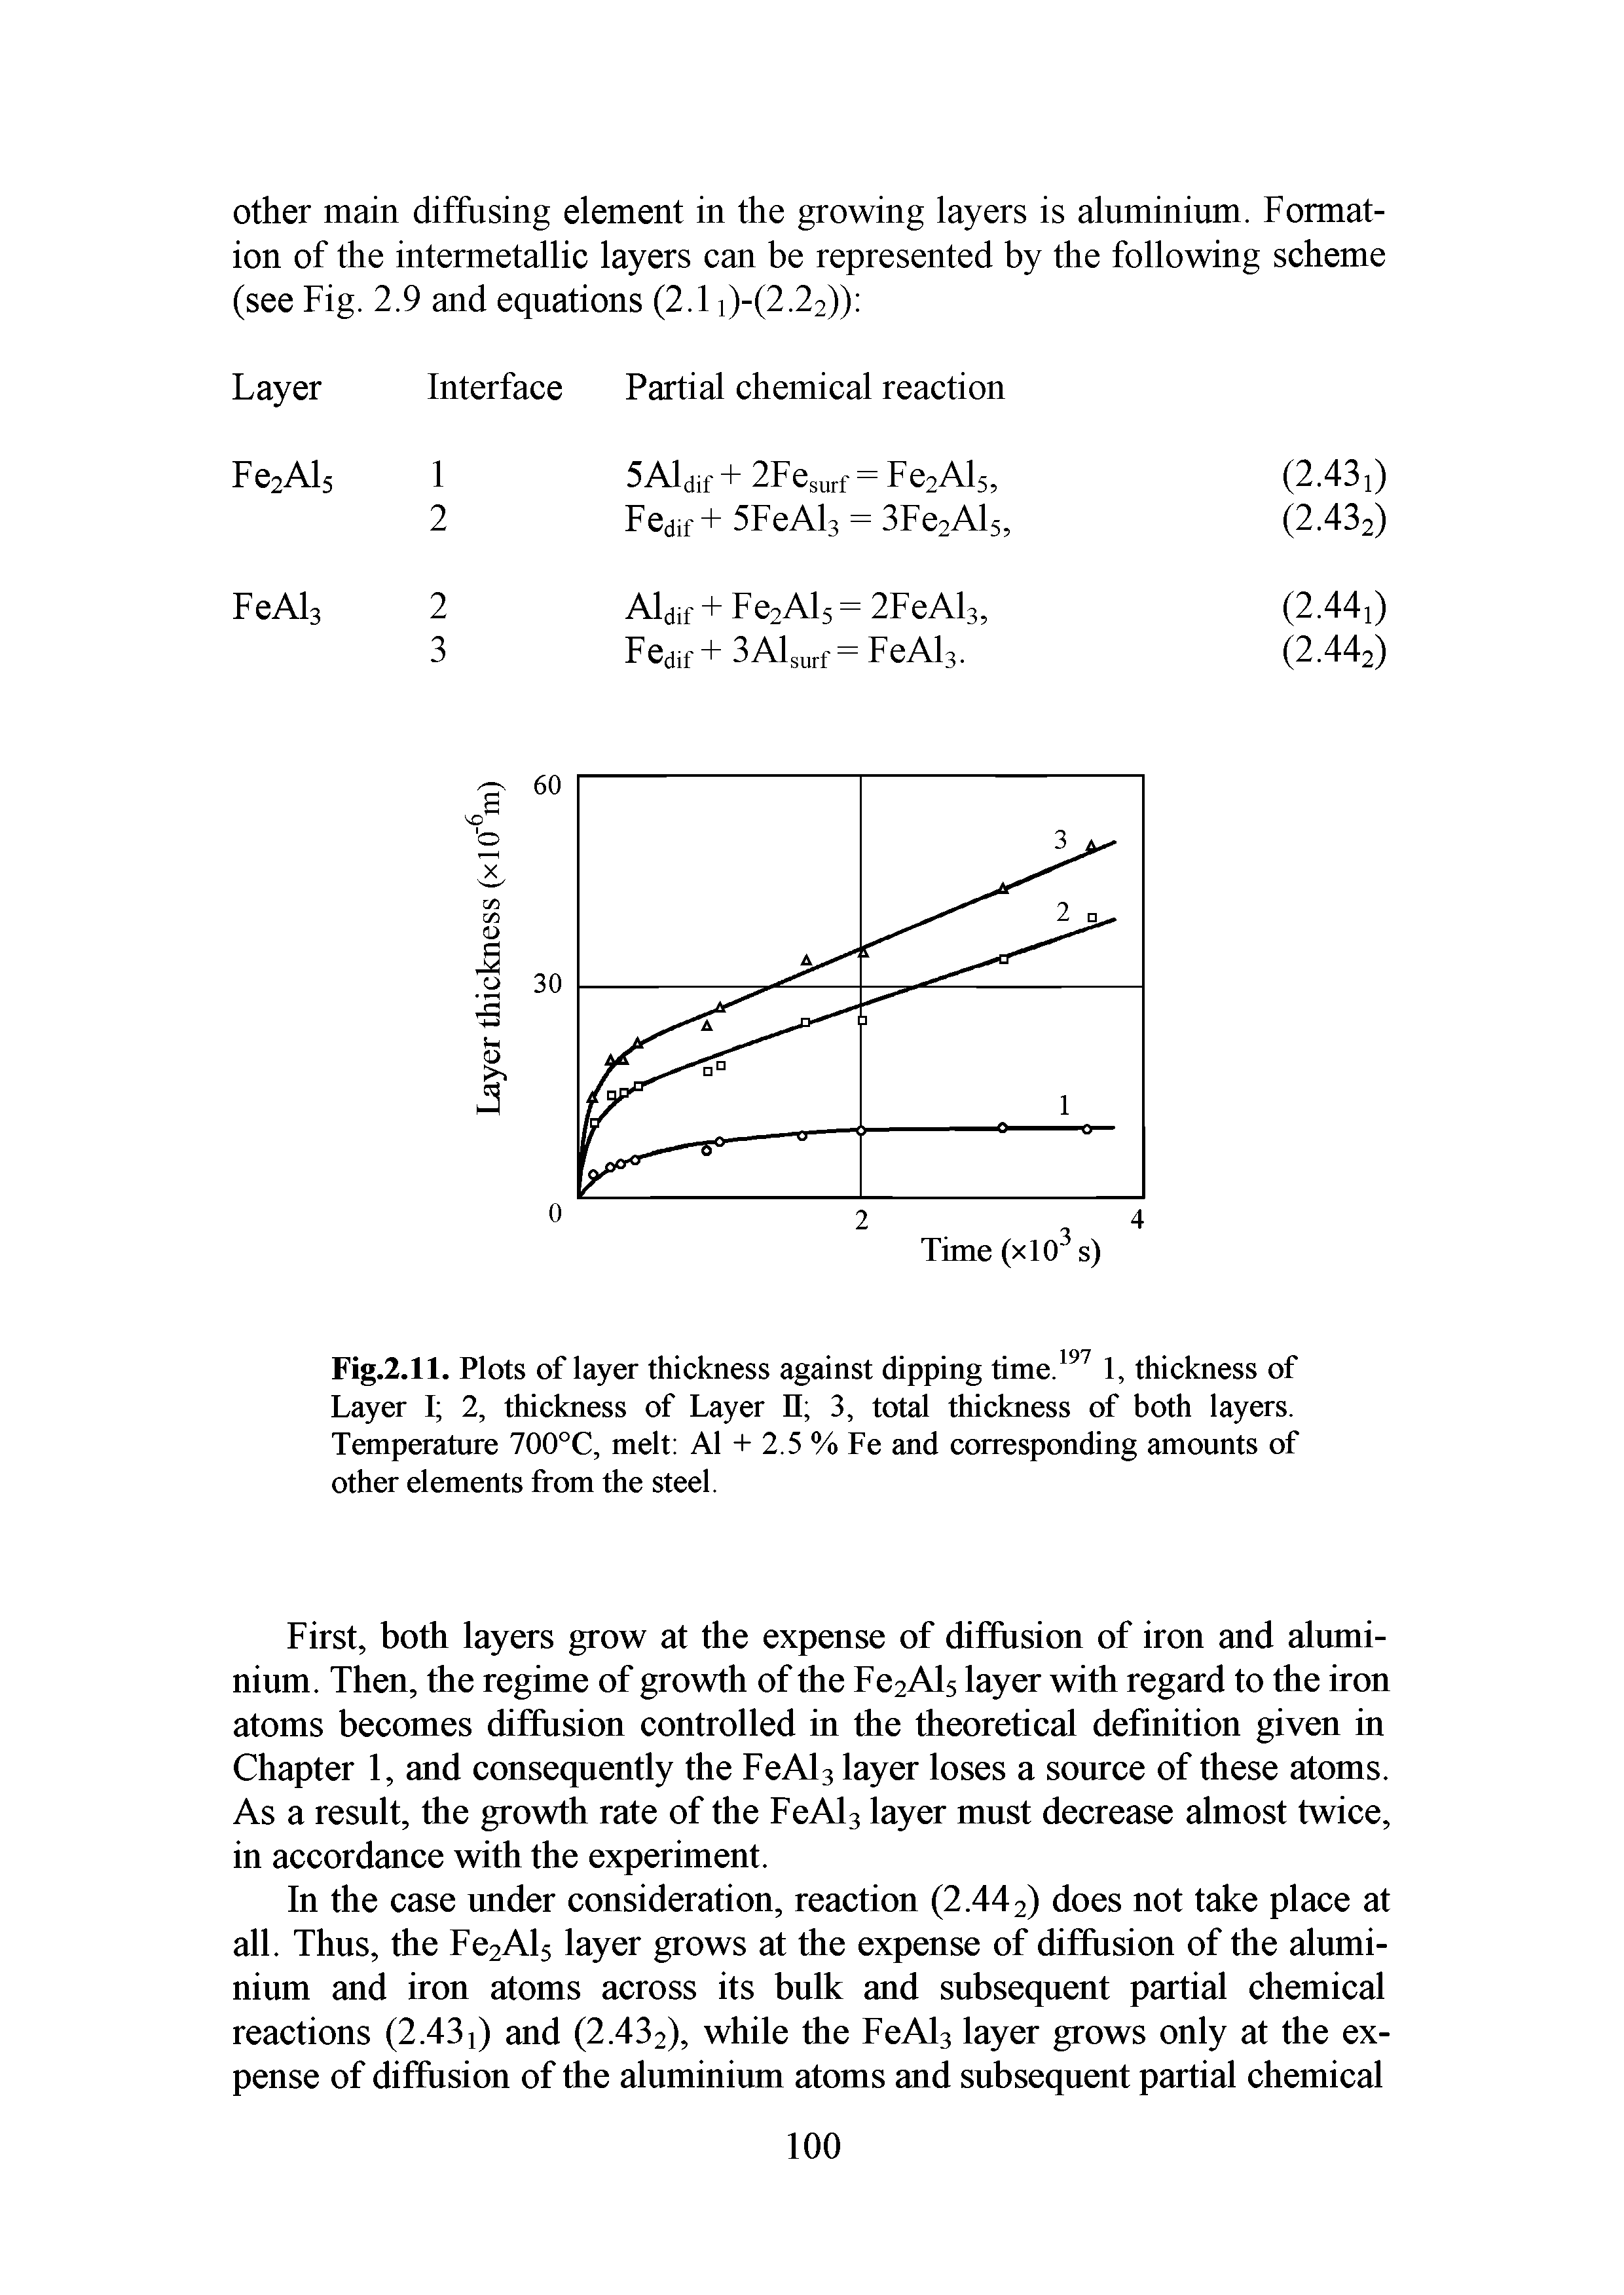 Fig.2.11. Plots of layer thickness against dipping time.197 1, thickness of Layer I 2, thickness of Layer H 3, total thickness of both layers. Temperature 700°C, melt A1 + 2.5 % Fe and corresponding amounts of other elements from the steel.